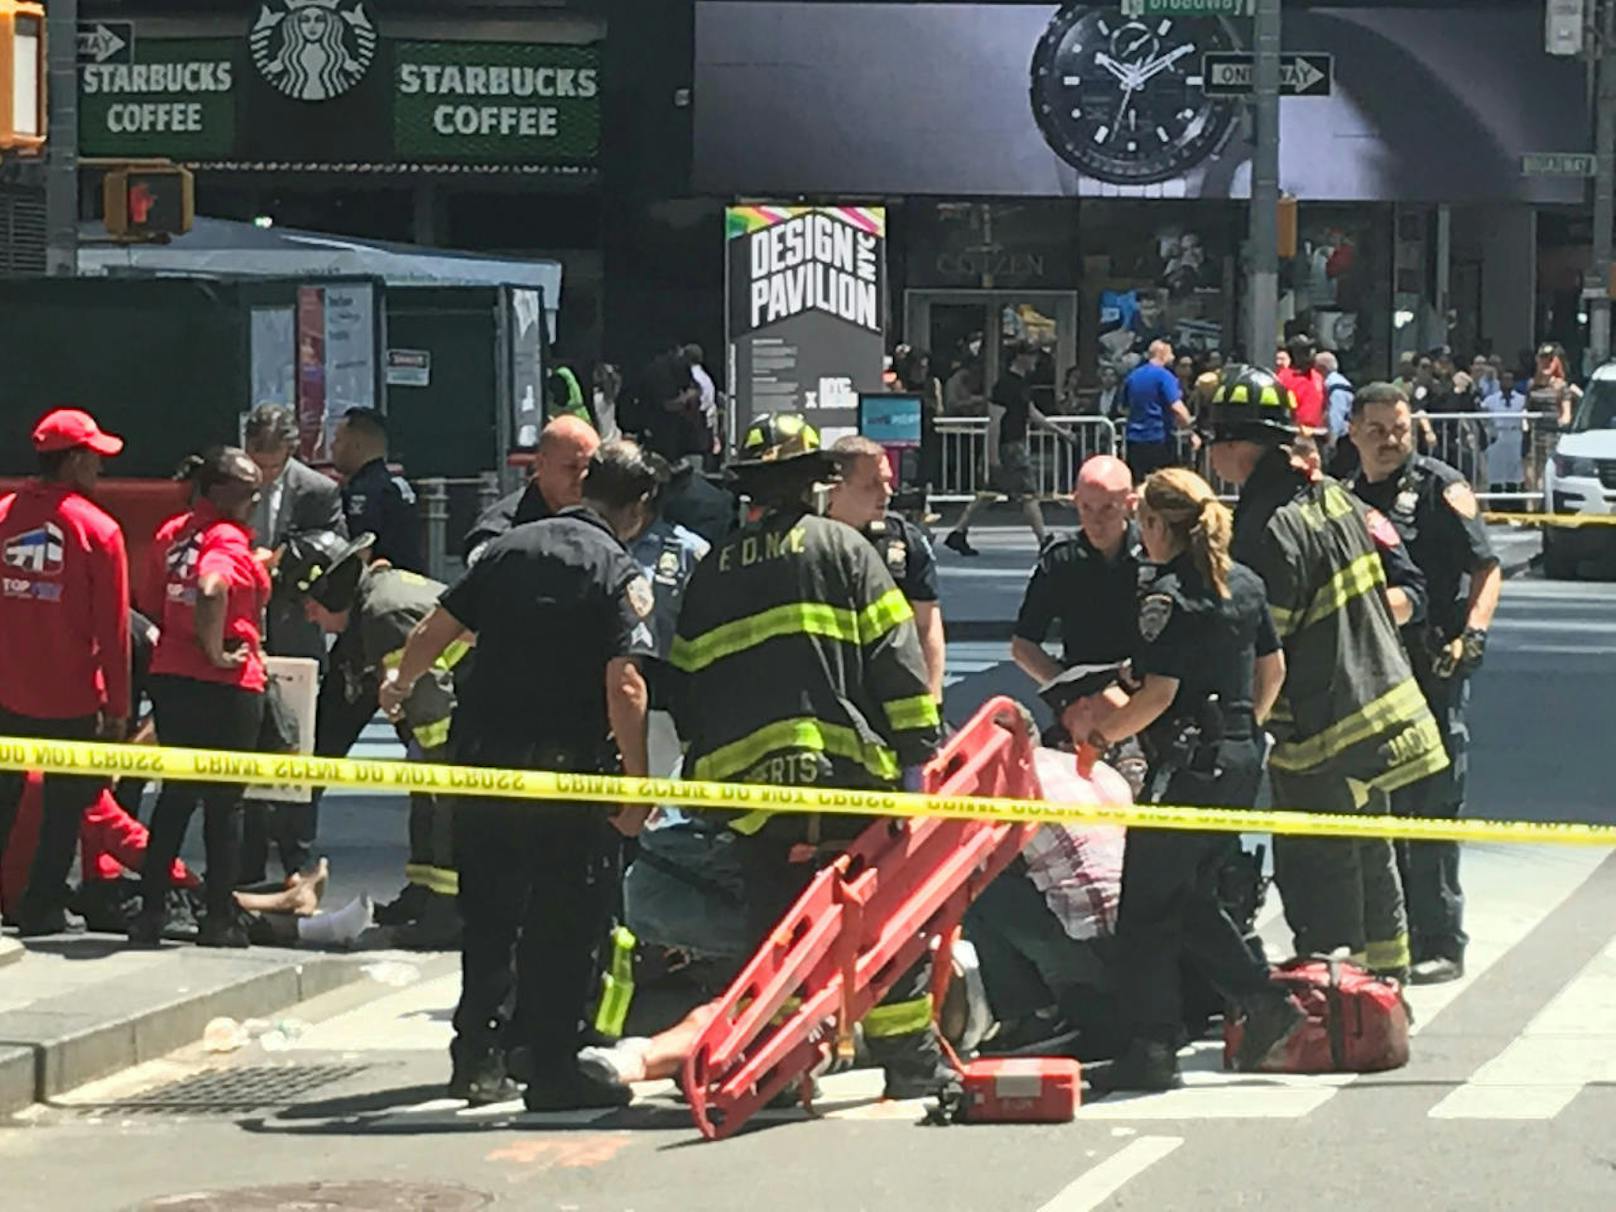 Auto rast in Menschenmenge am New Yorker Times Square